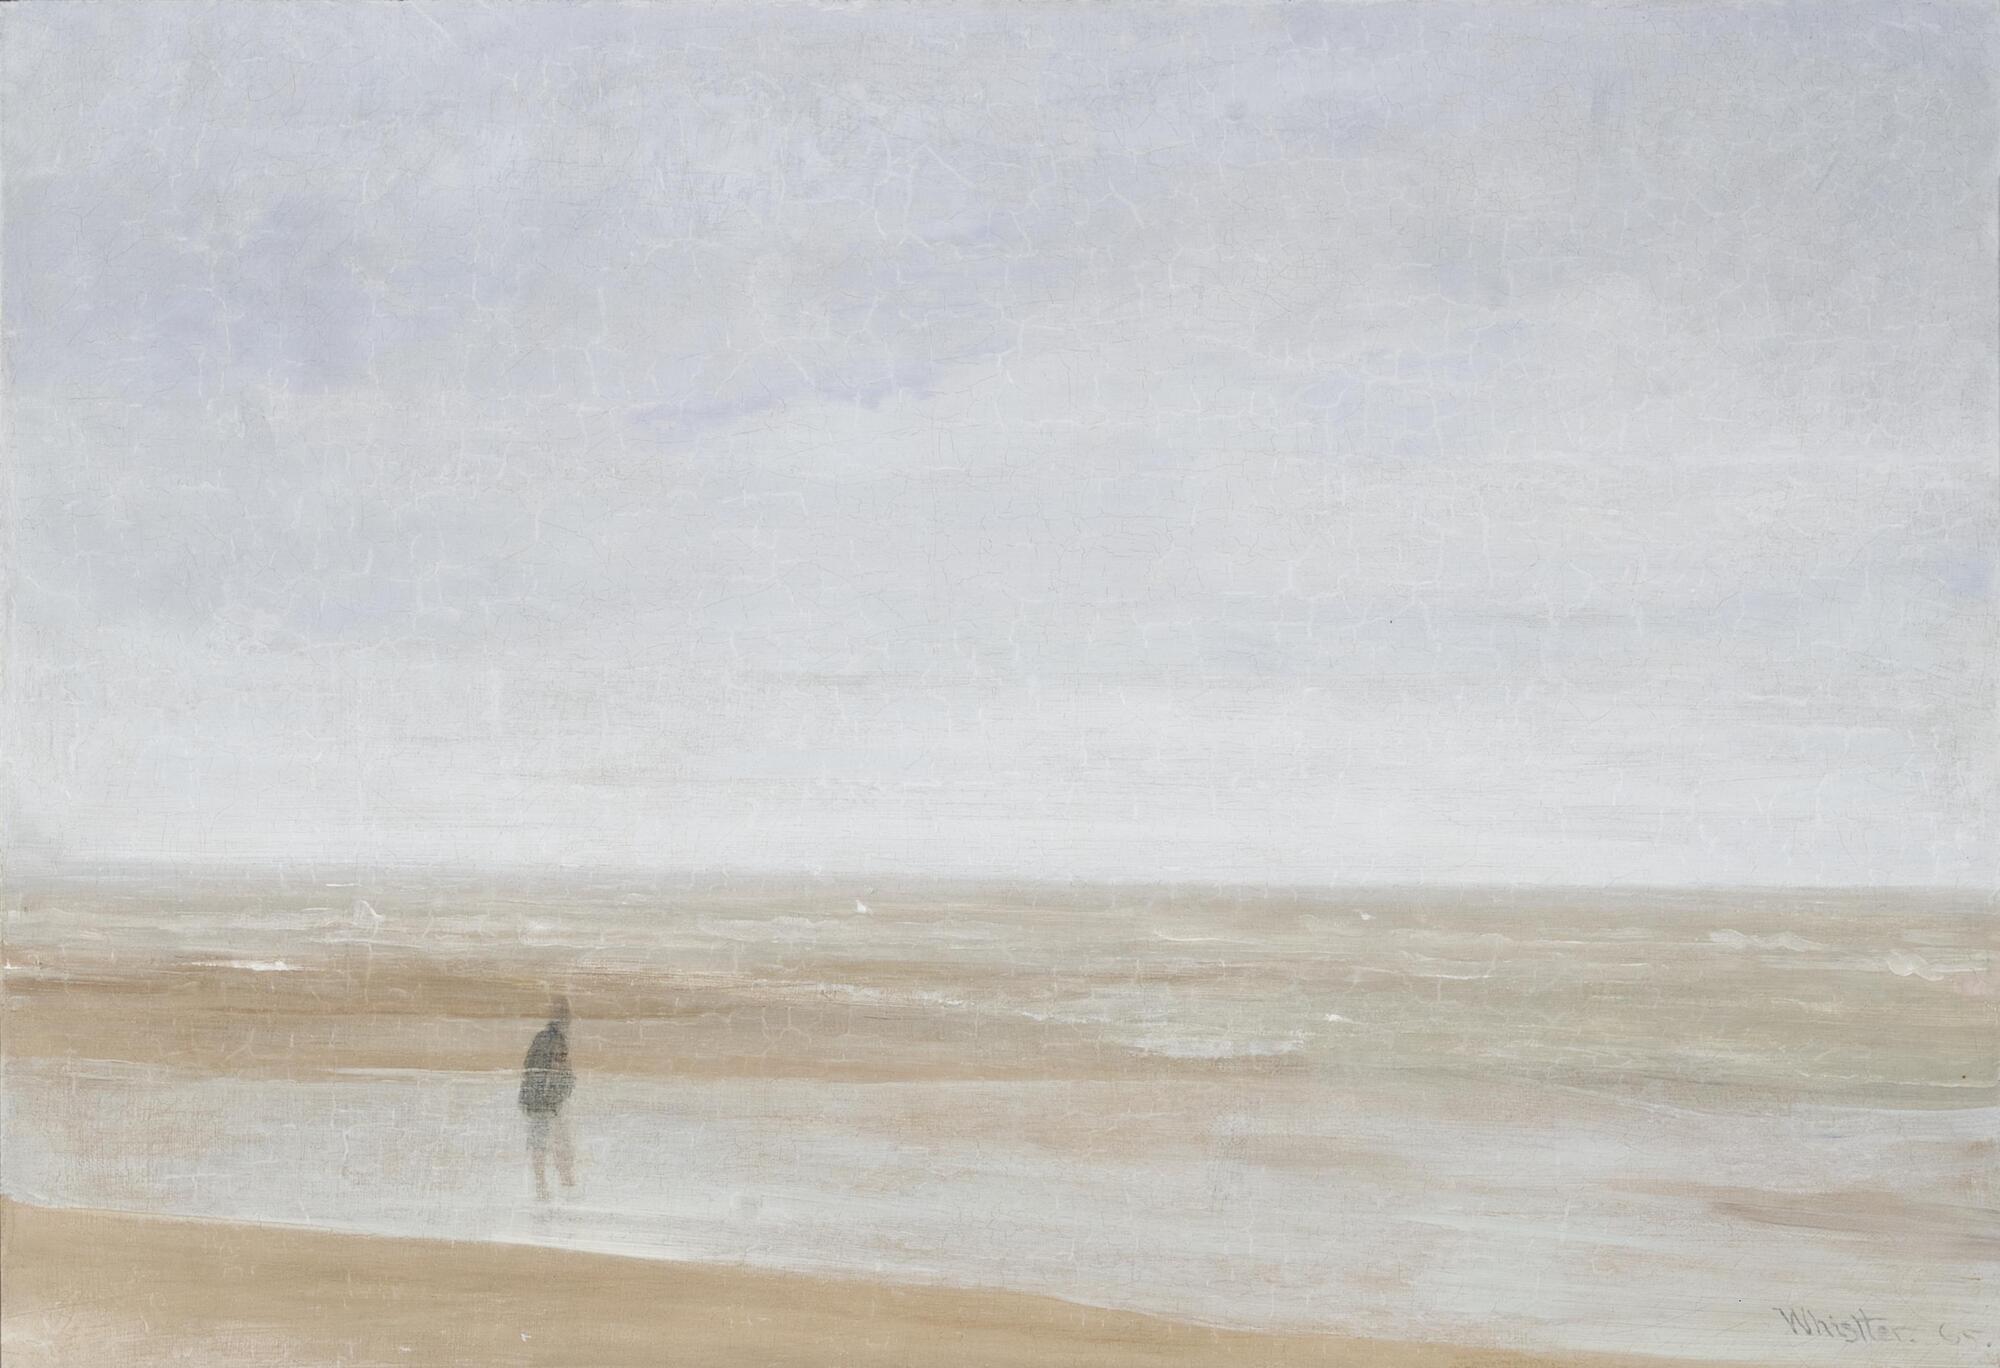 The painting depicts a solitary male figure standing along the shore. The thin layers of paint evoke a misty, overcast day with the figure standing perhaps on a tidal flat.